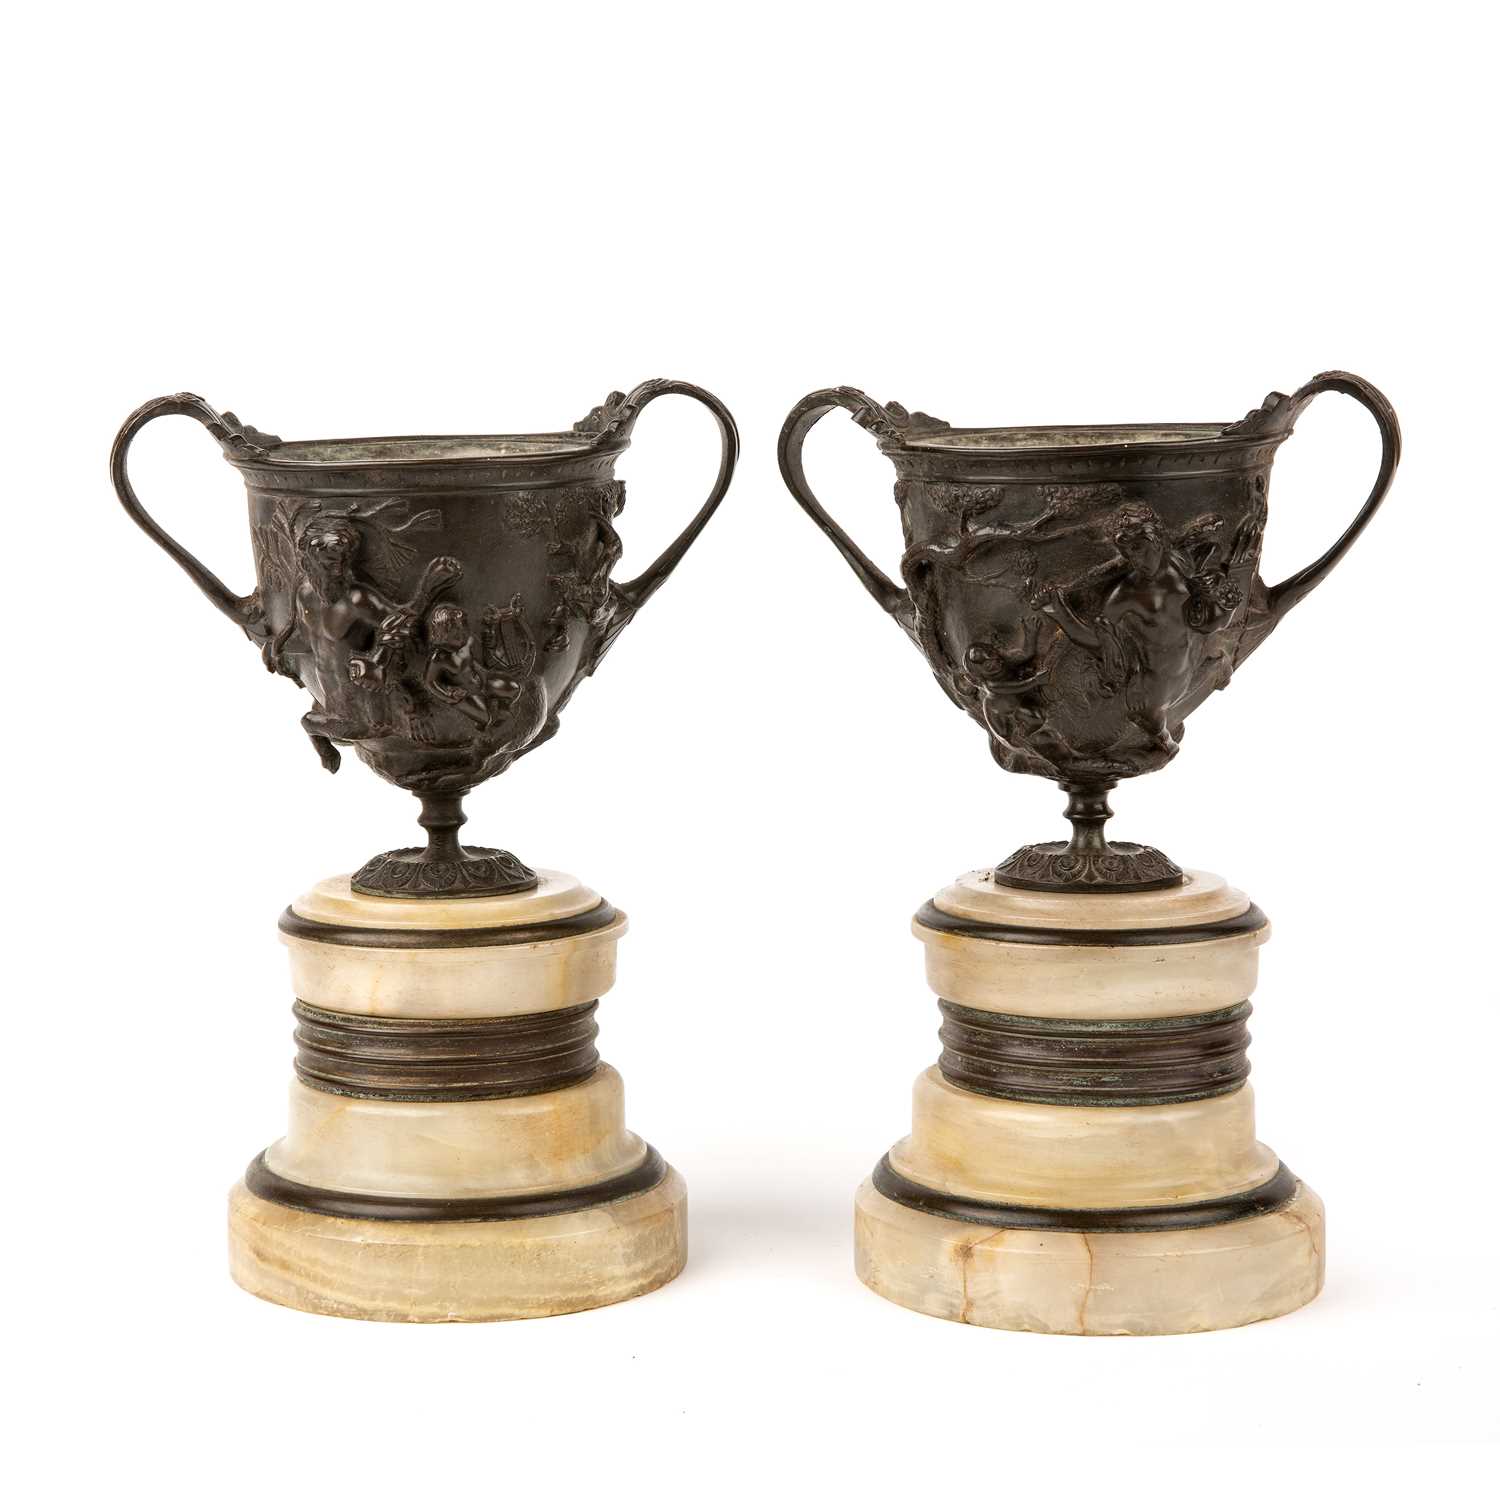 A pair of 19th century Grand Tour bronze urns with Centaurs in relief and mounted on alabaster socle